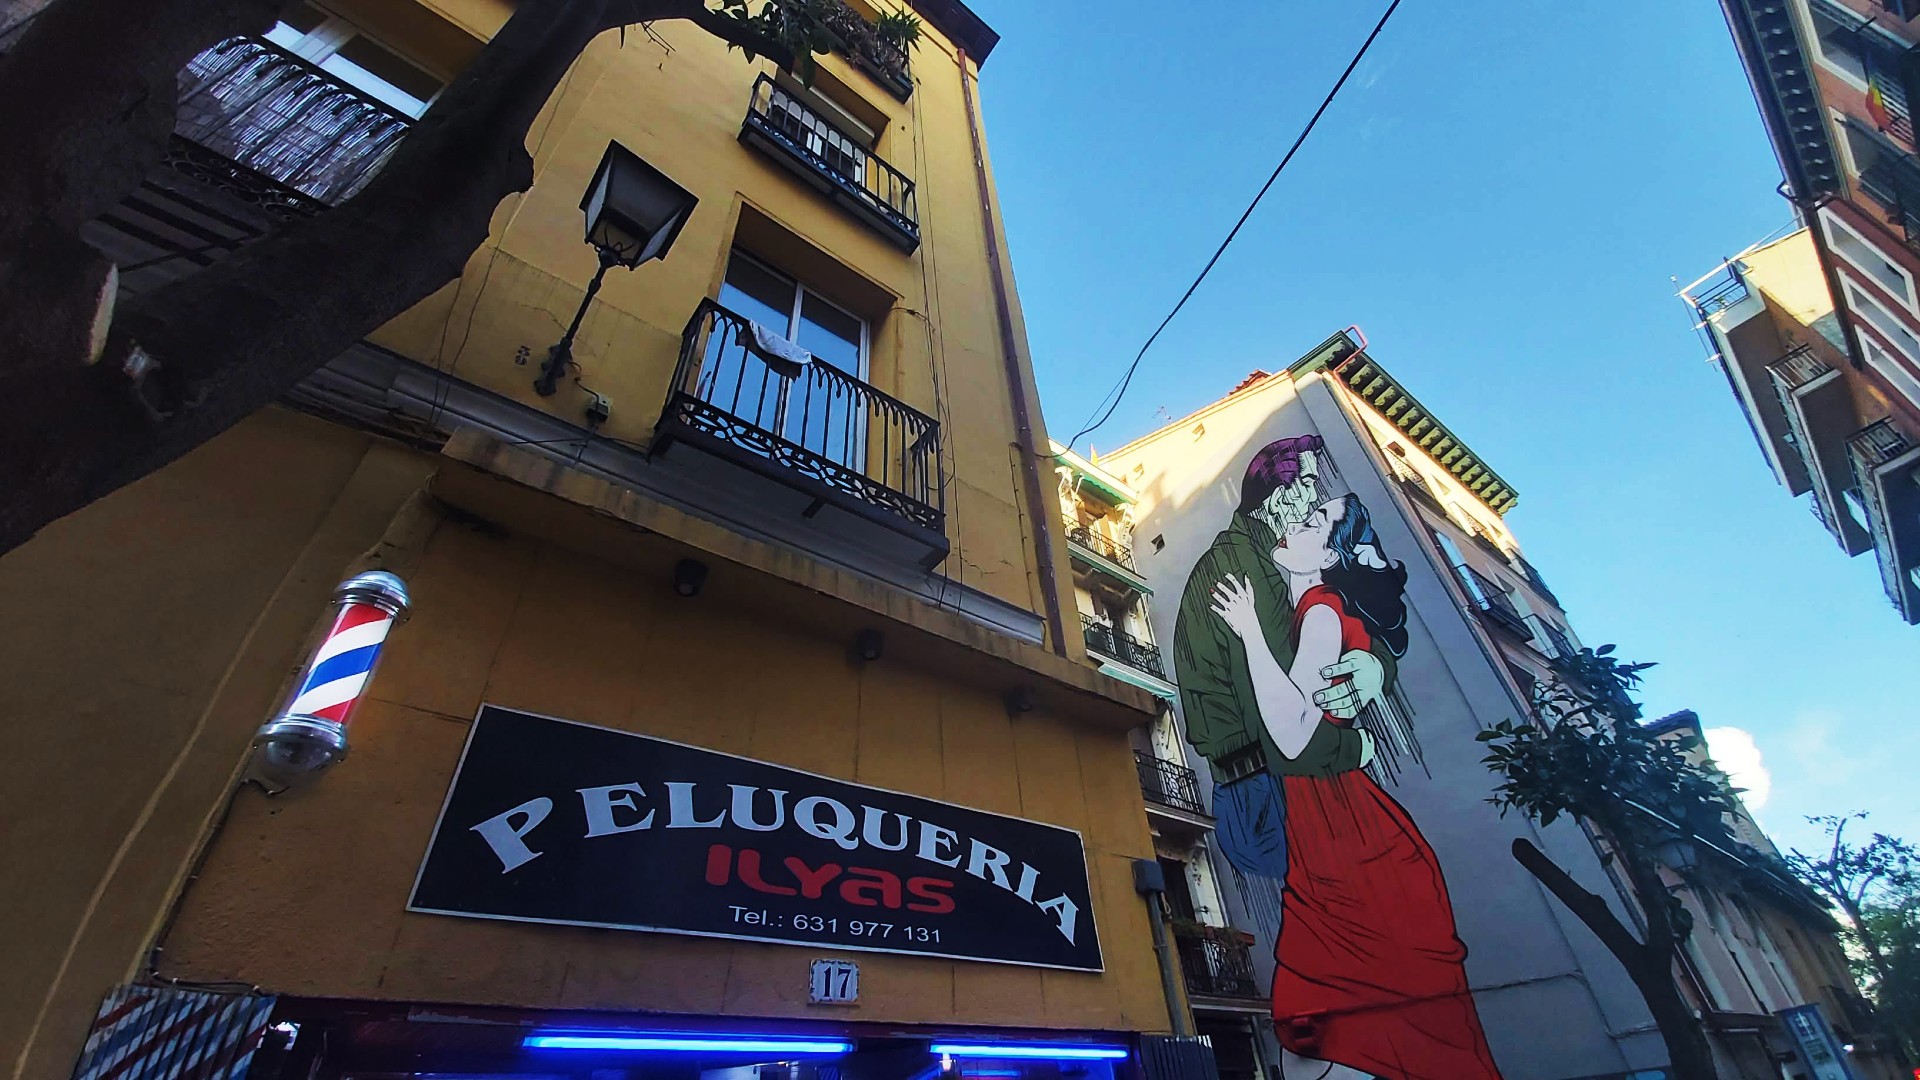 Home to El Rastro flea market and Lavapiés, Distrito de Embajadores is a hipster-friendly area packed with alternative bars, quirky cafés and some of the best street art in Madrid